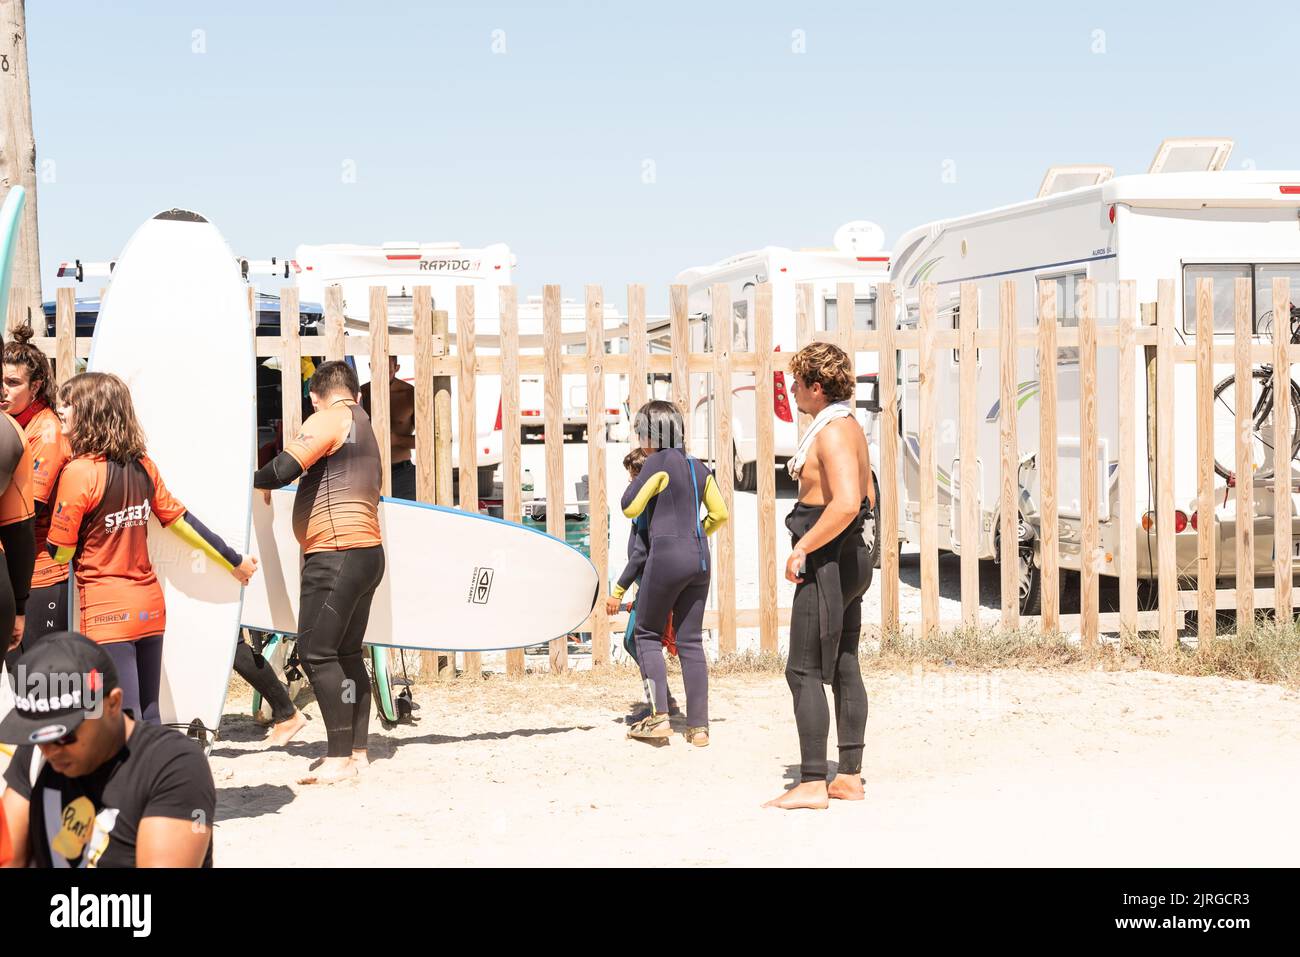 Aveiro, Portugal - August 19, 2022: people with wetsuits and pick up surfboards at the secreto surf school facilities. Stock Photo